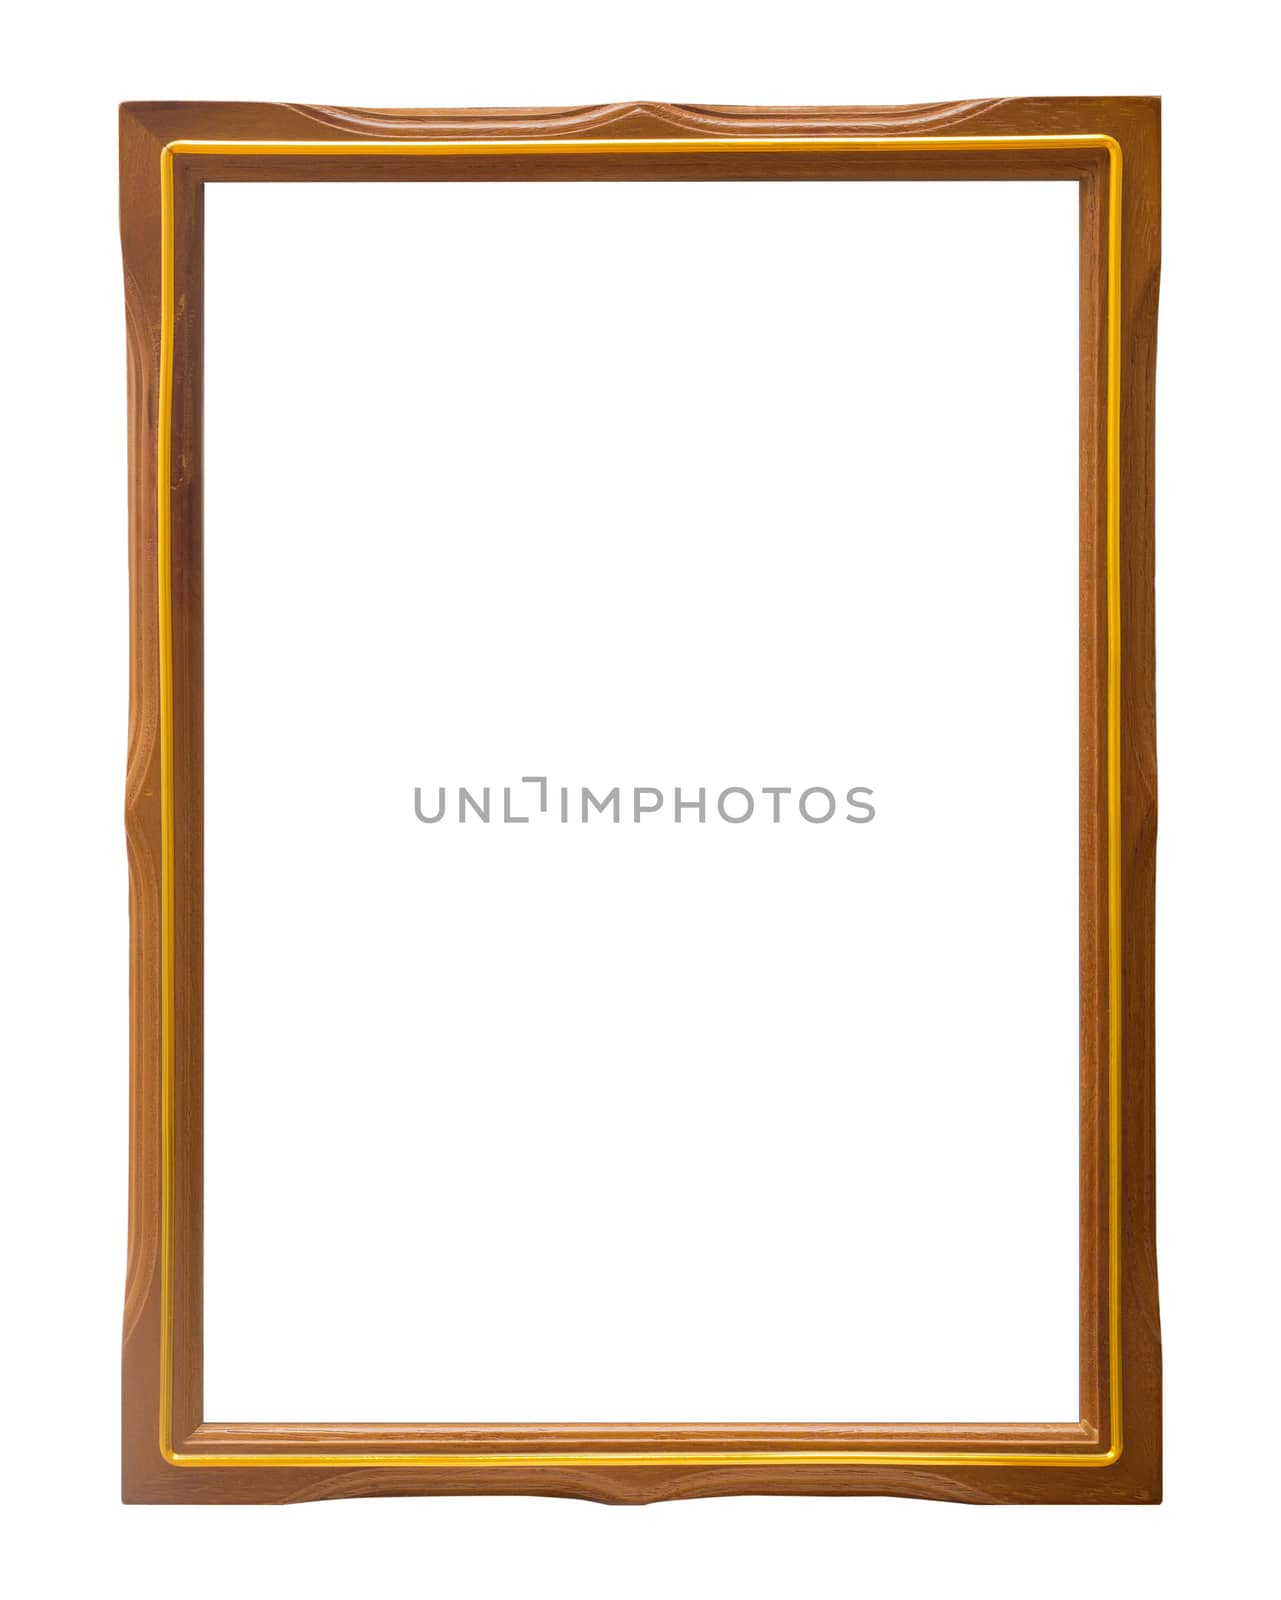 Bronze and Gold wood frame vintage isolated on white background.